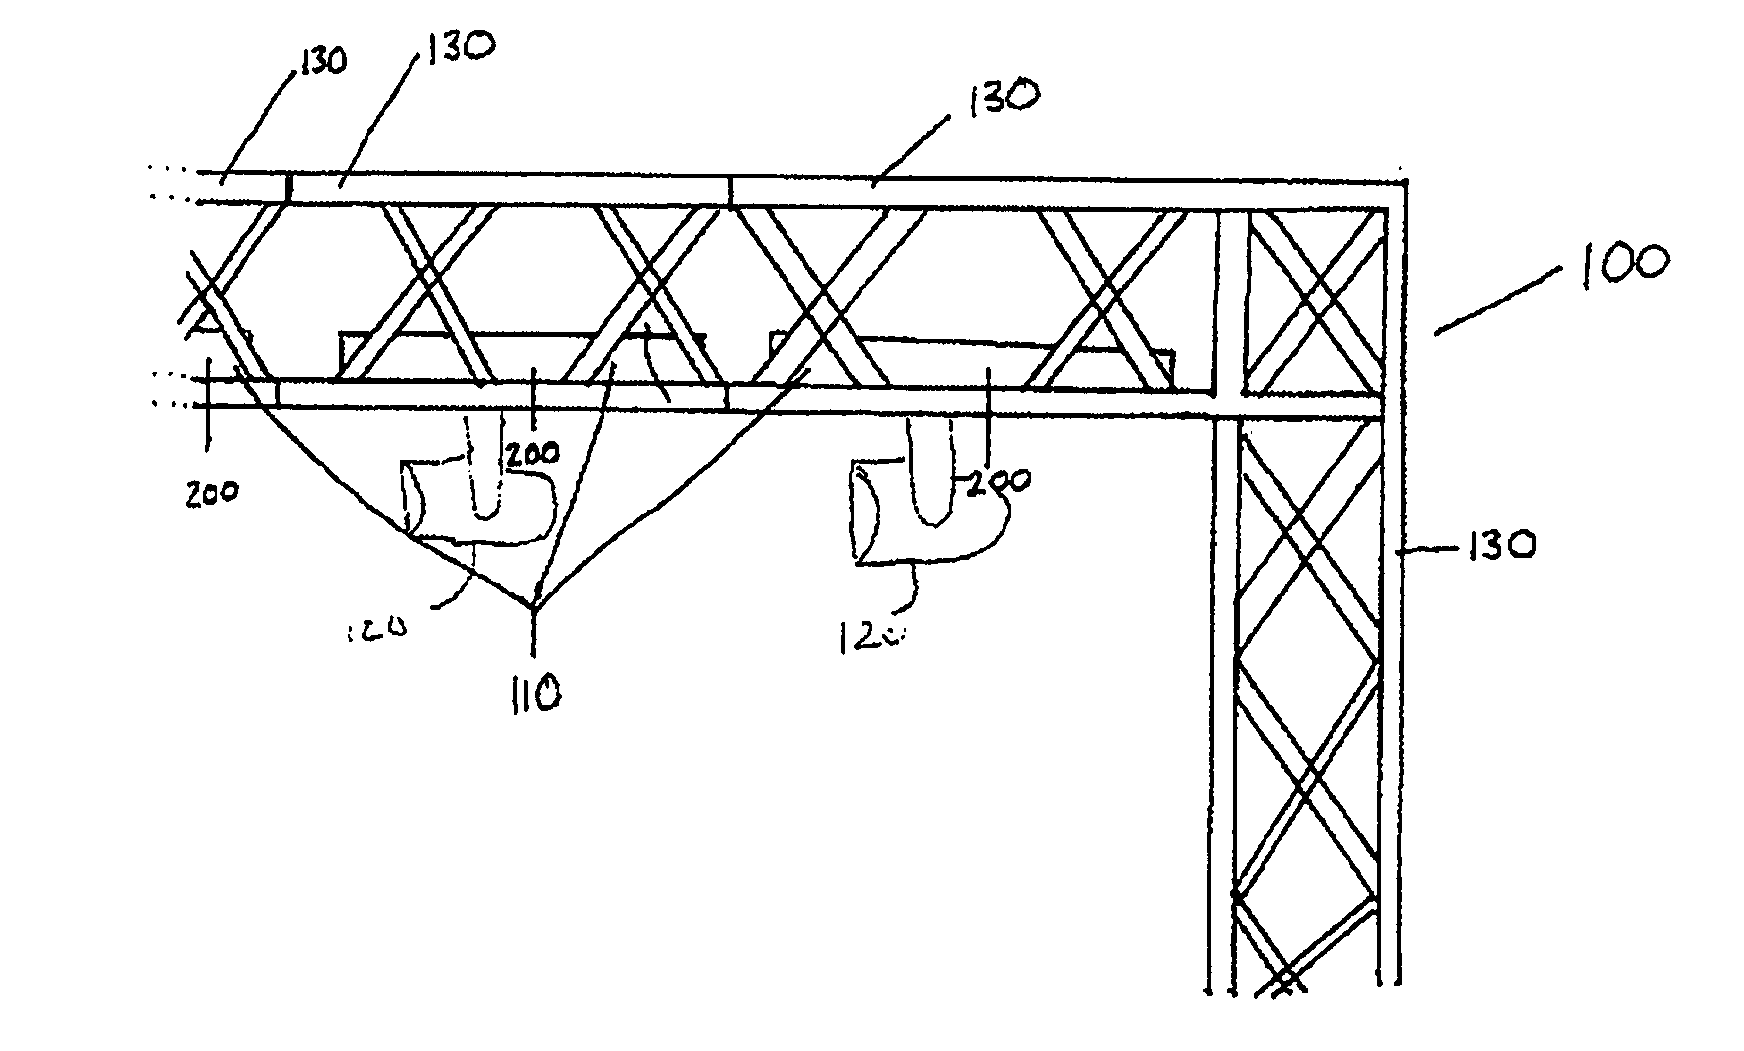 Systems and Methods for Distributing Power and Data in a Lighting System